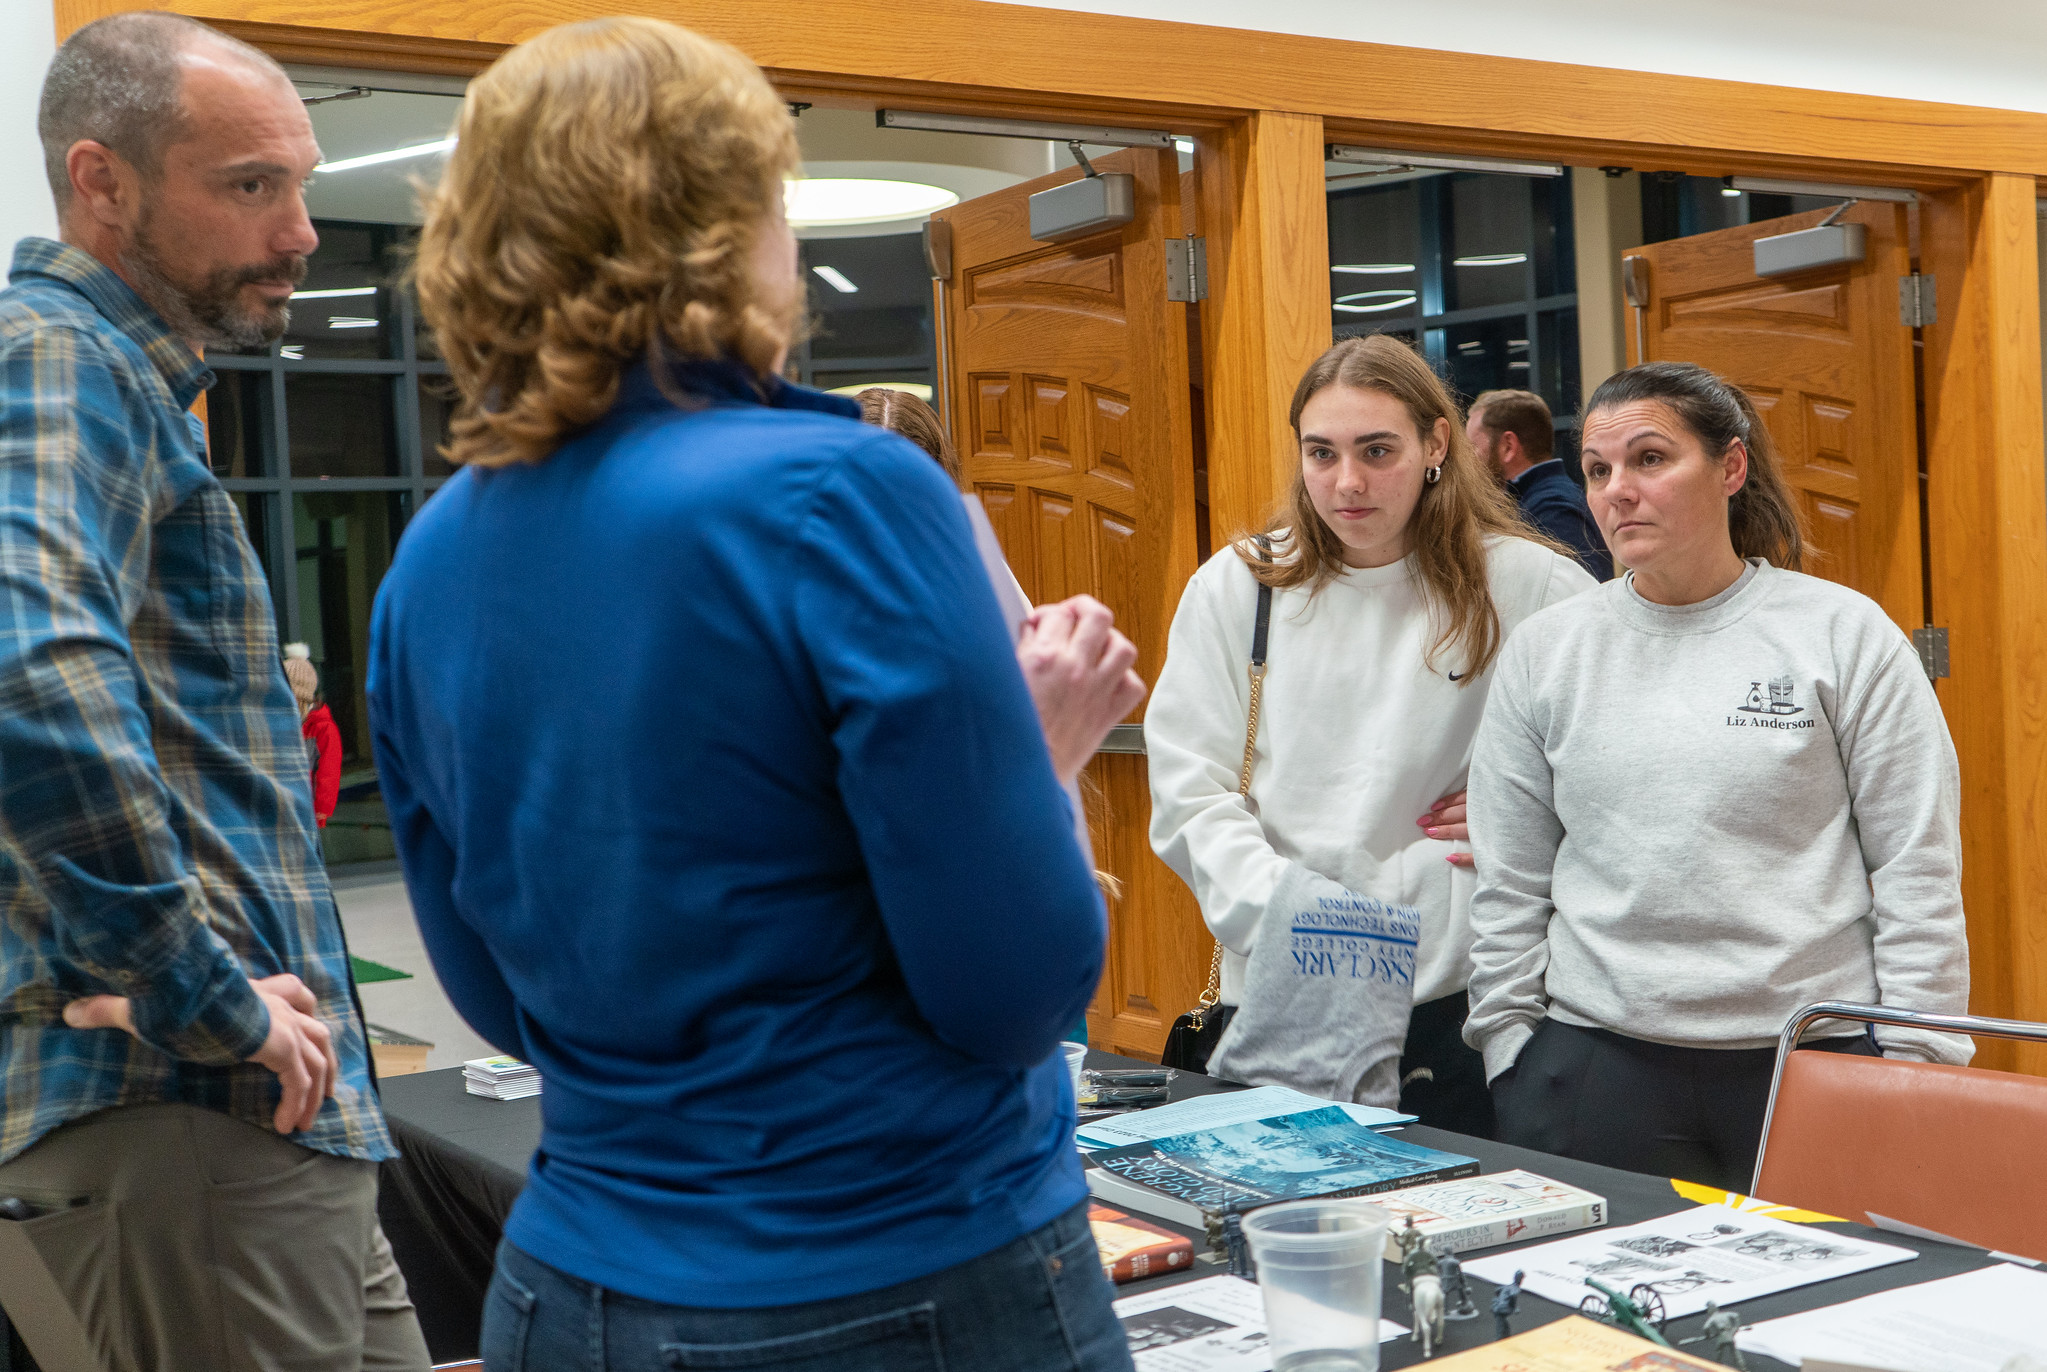 The Industrial Careers Open House gives both students and alumni the chance to network with local employers, as well as L&C faculty and staff.